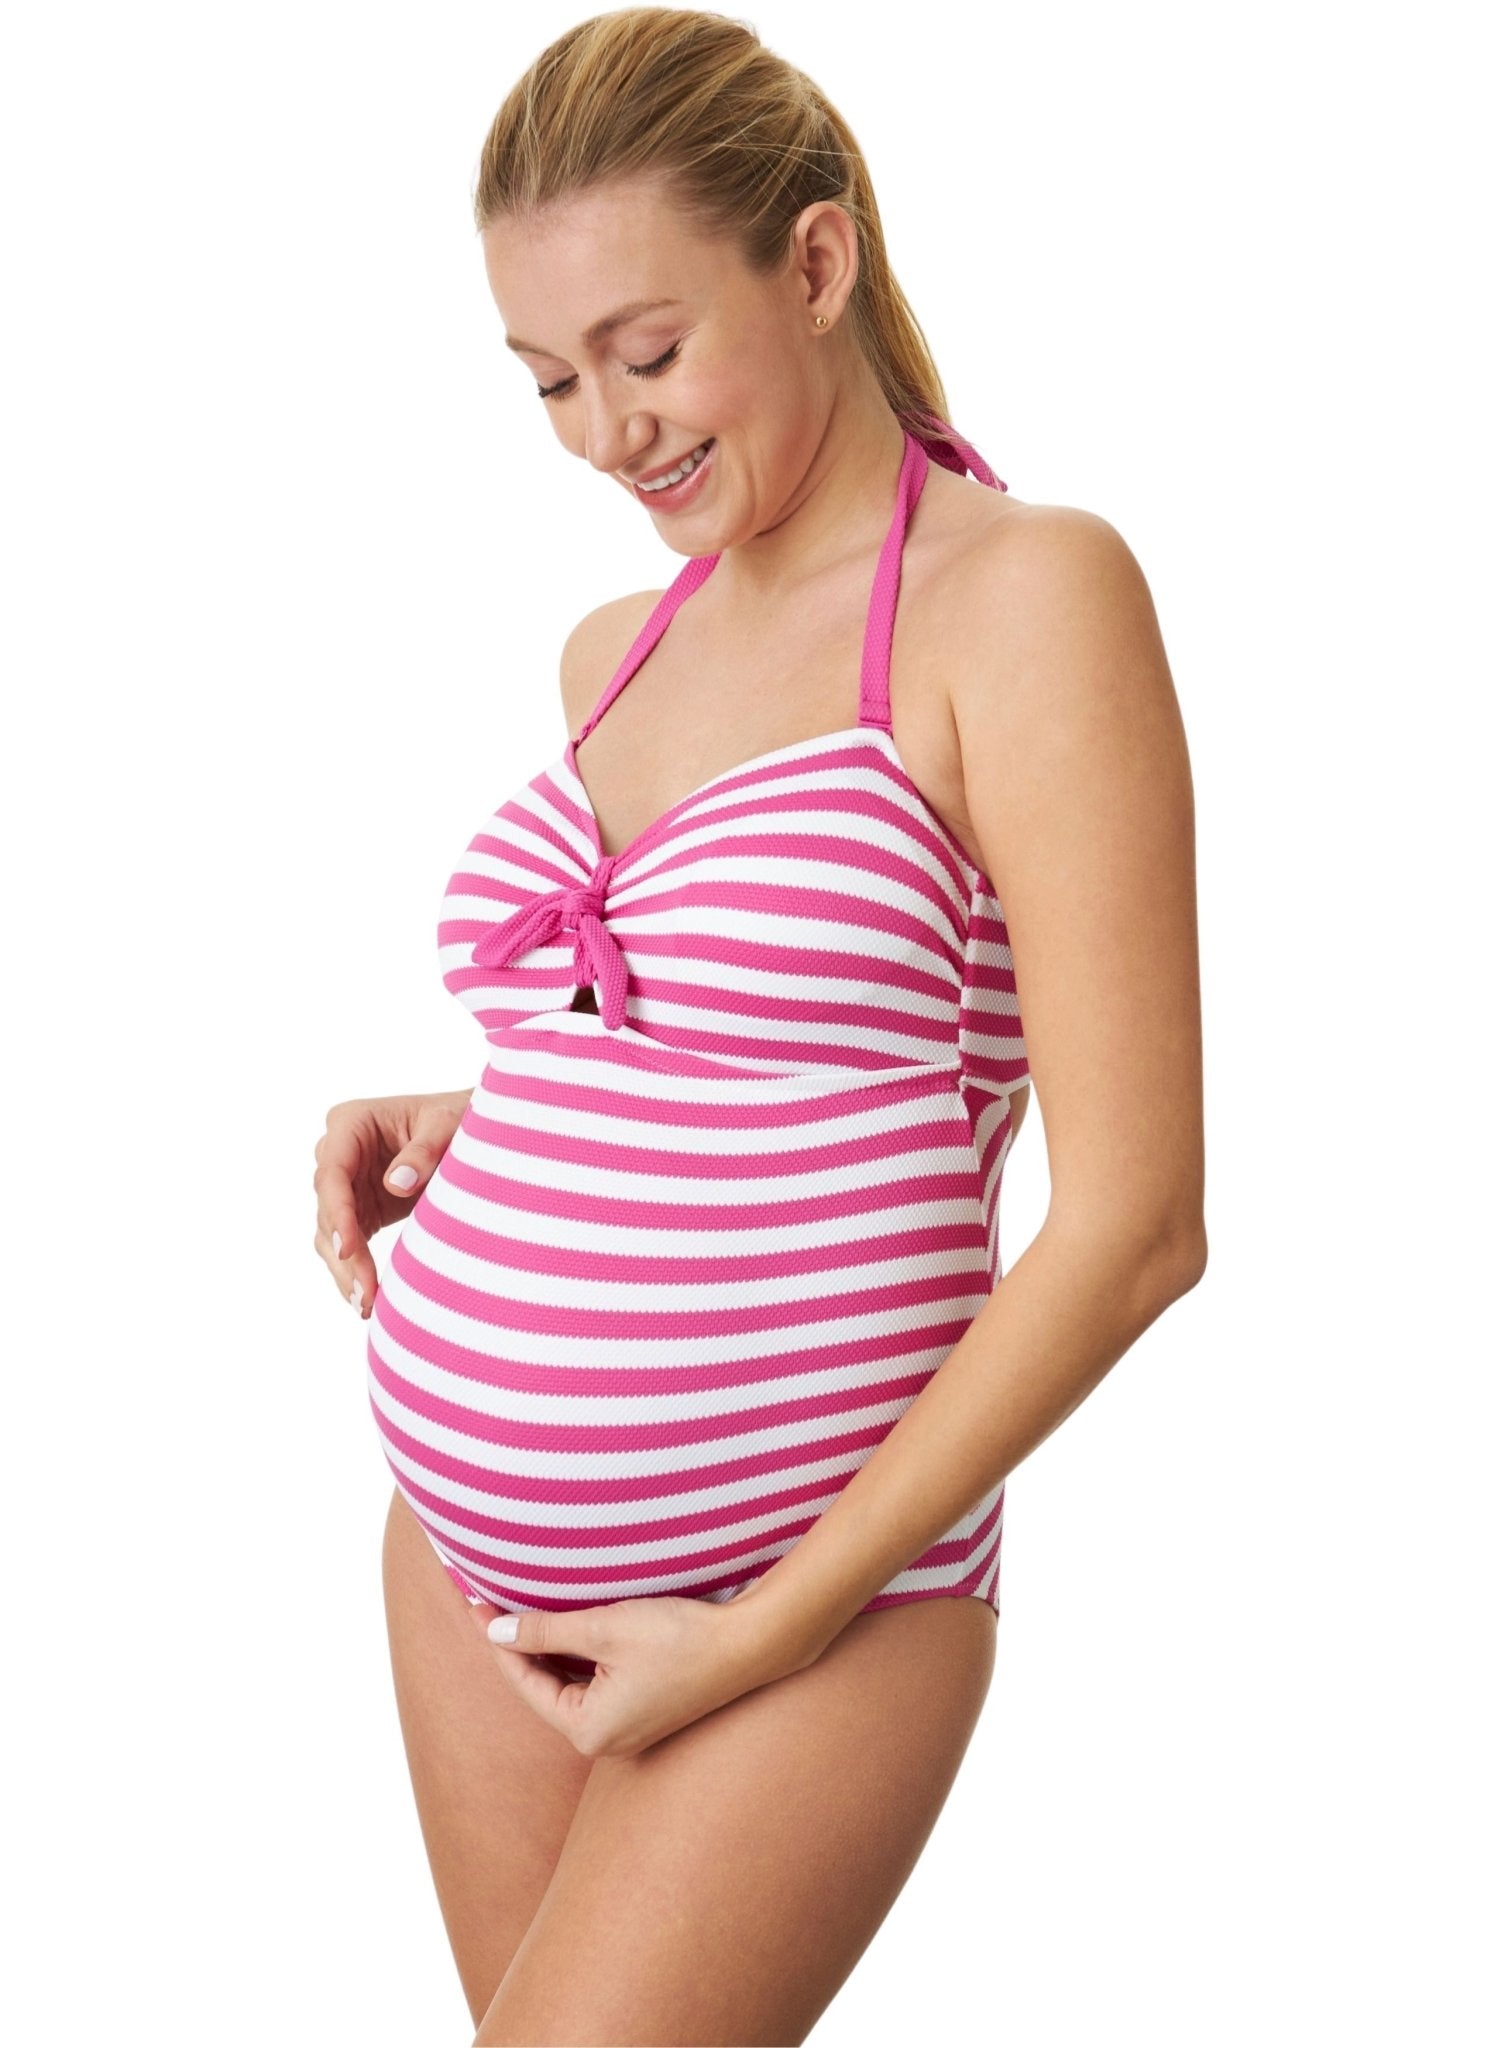 Rimini Pink Stripe One Piece Maternity Swimsuit - Mums and Bumps